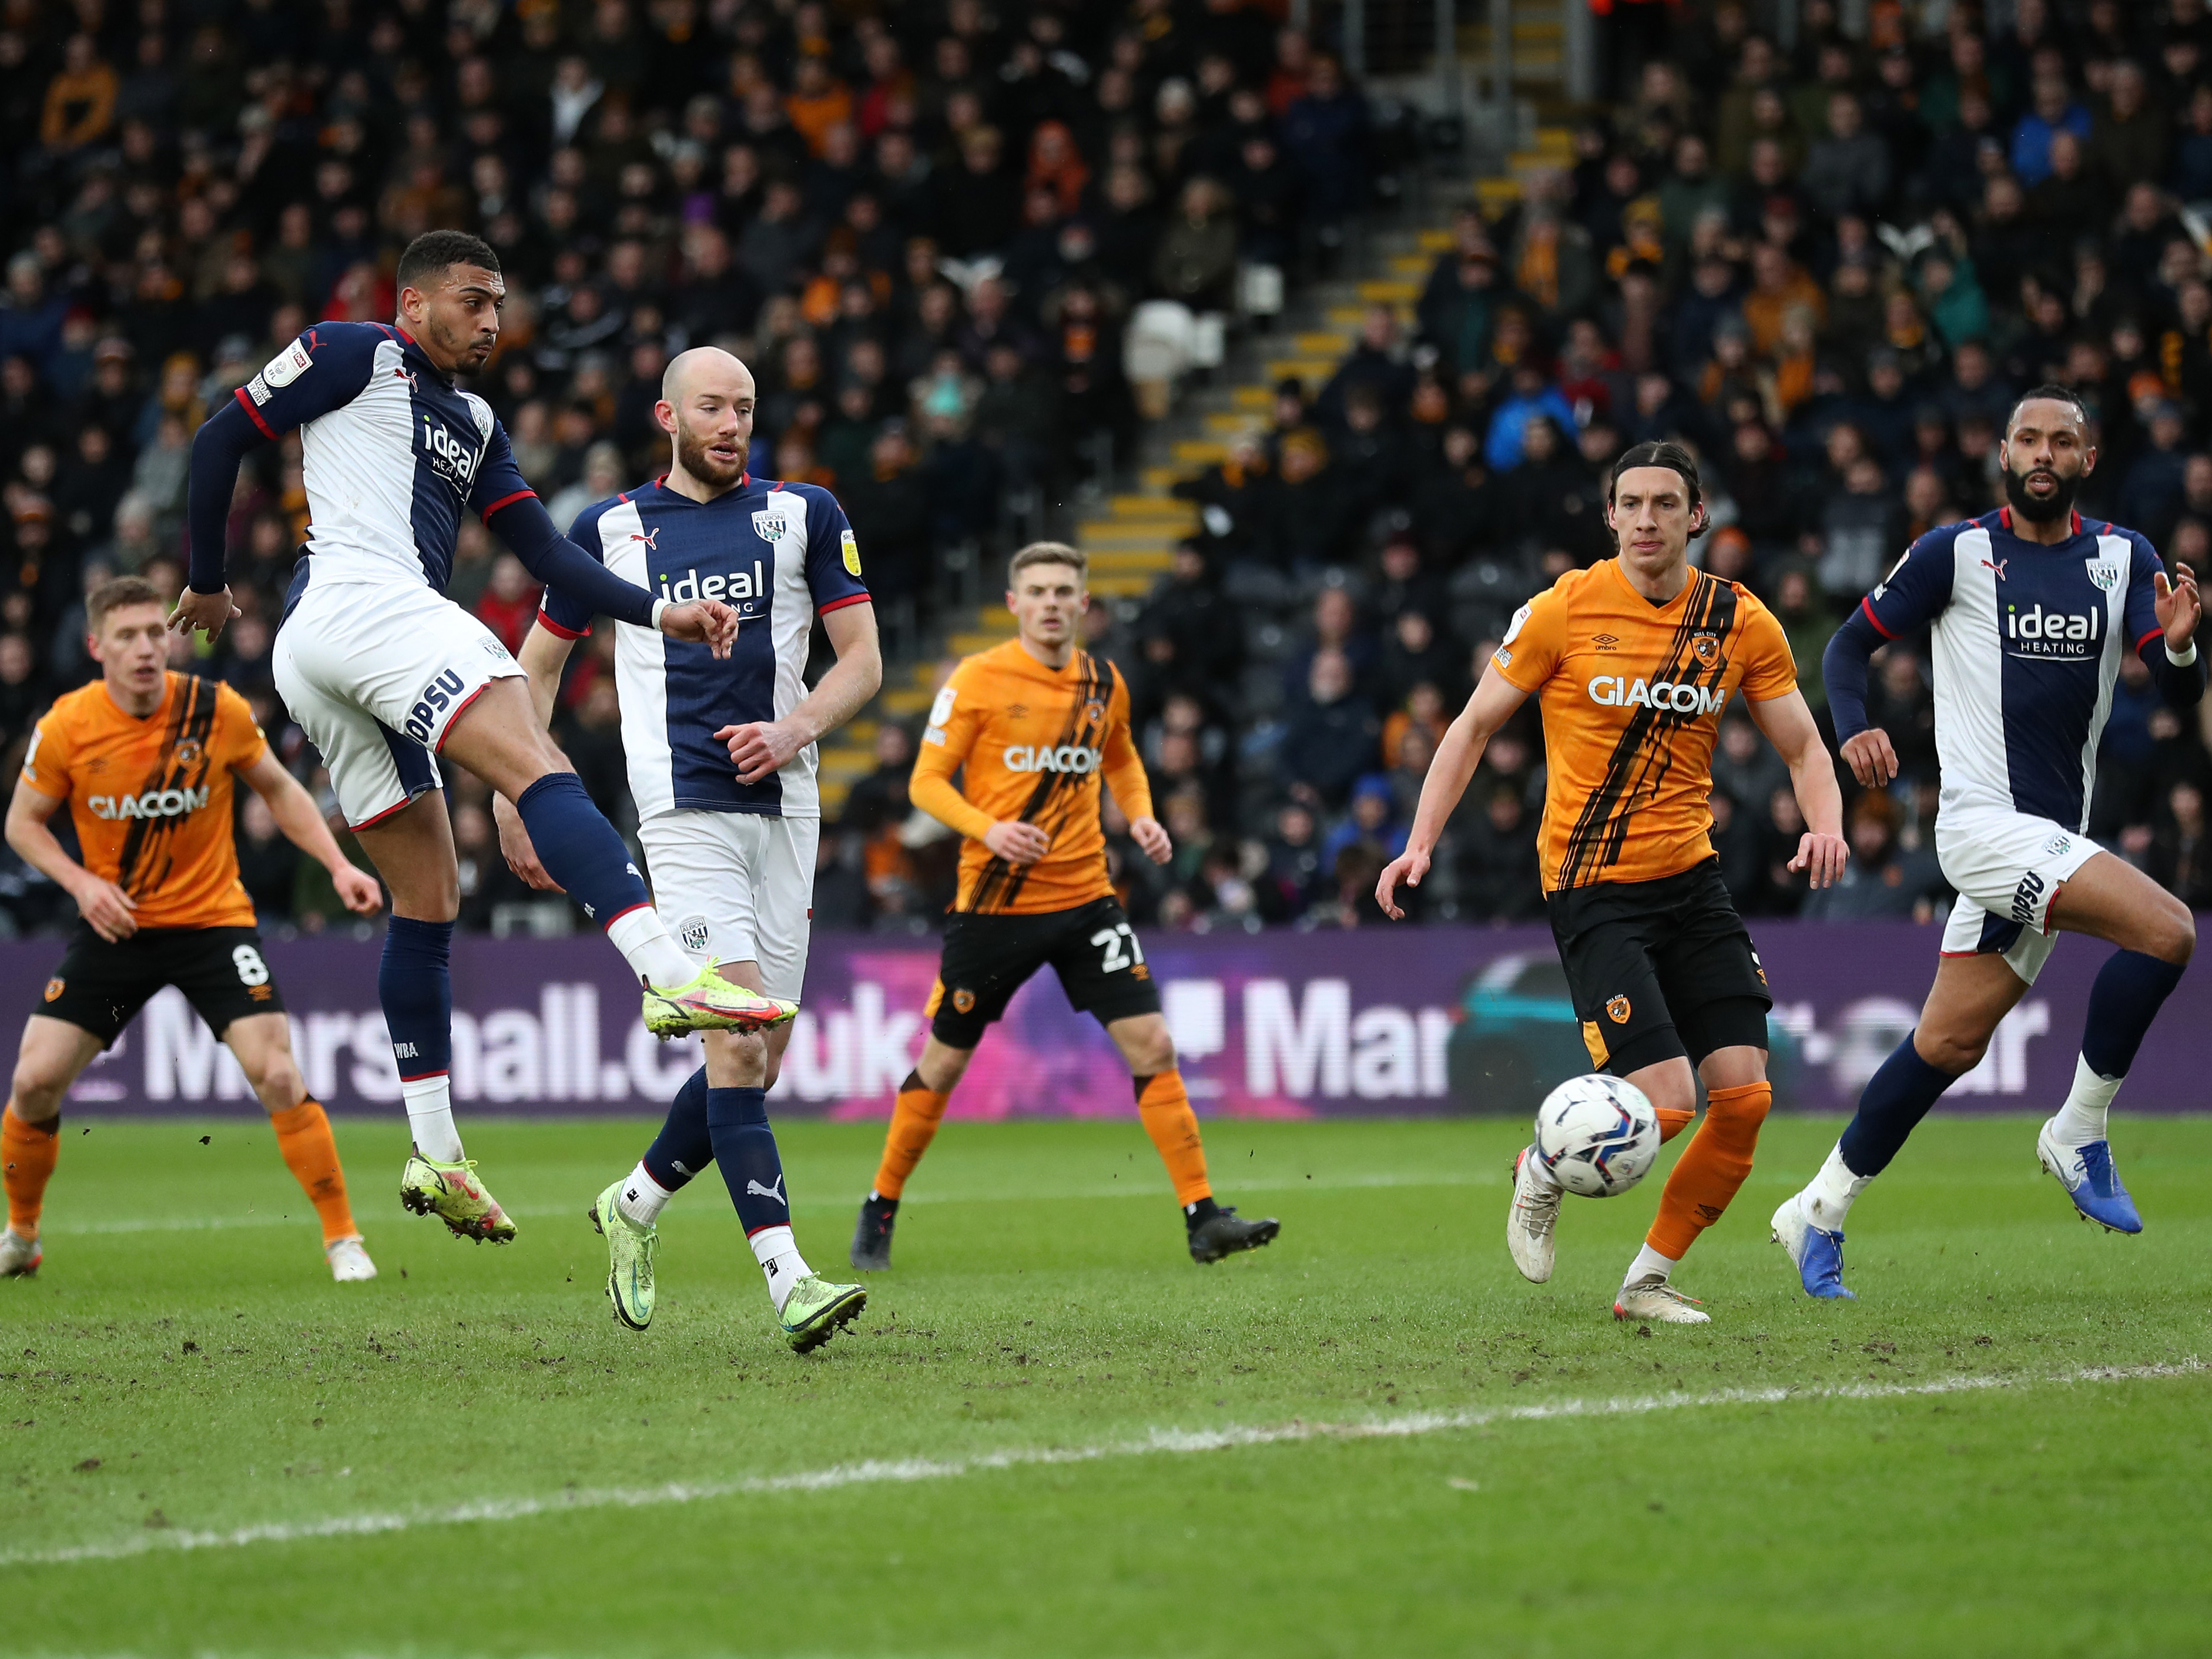 Hull 0 Albion 2